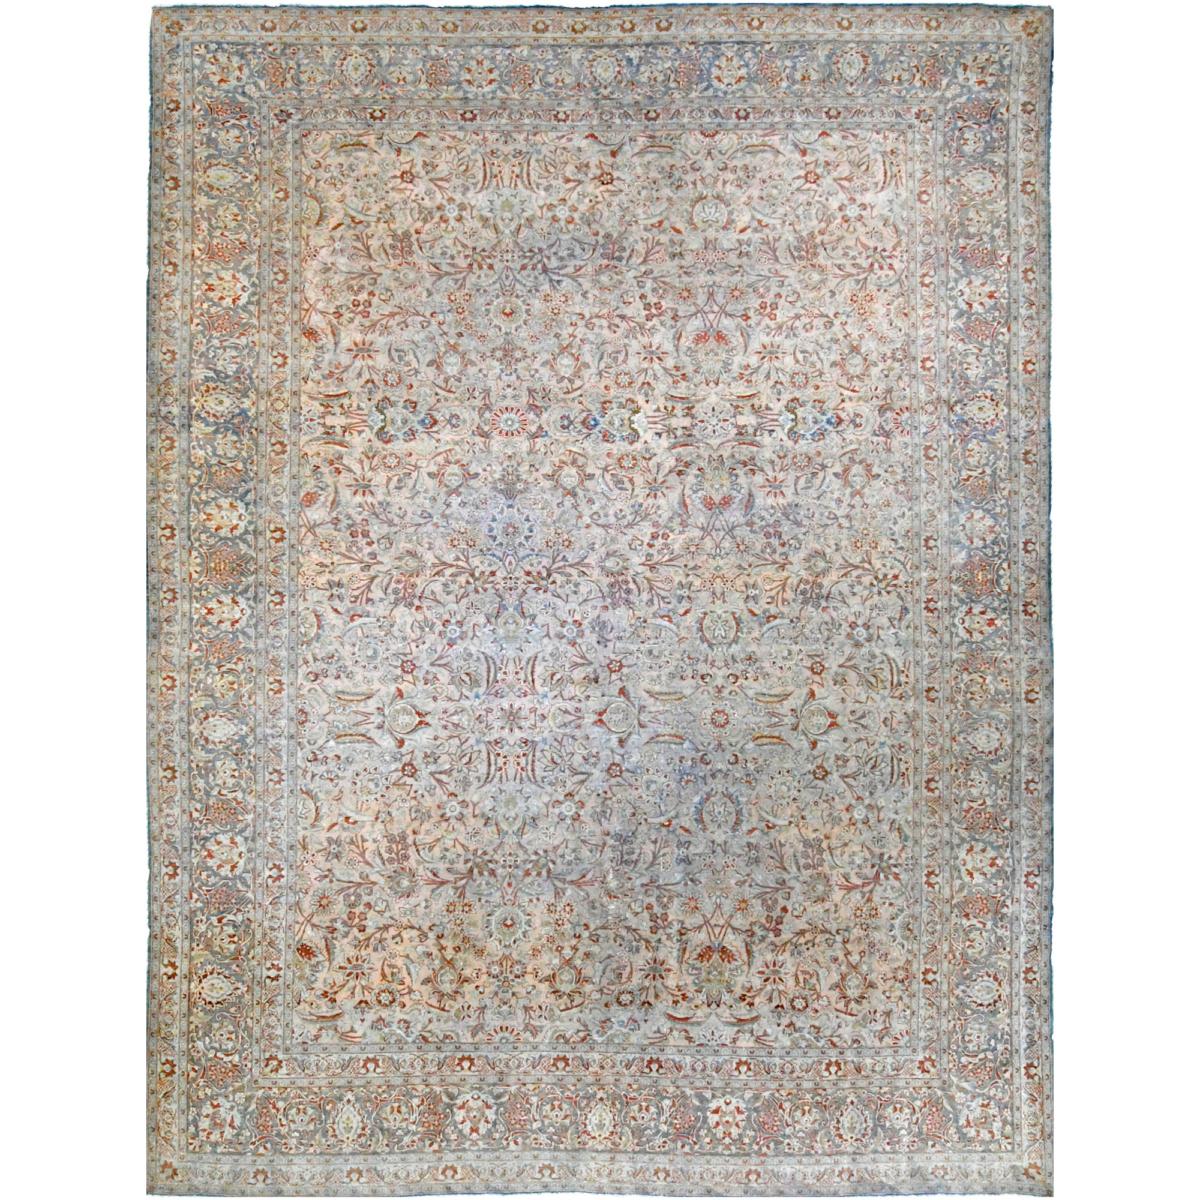 20th Century Antique, Fine Persian Mahal Rug 10’5 x 14’4 For Sale